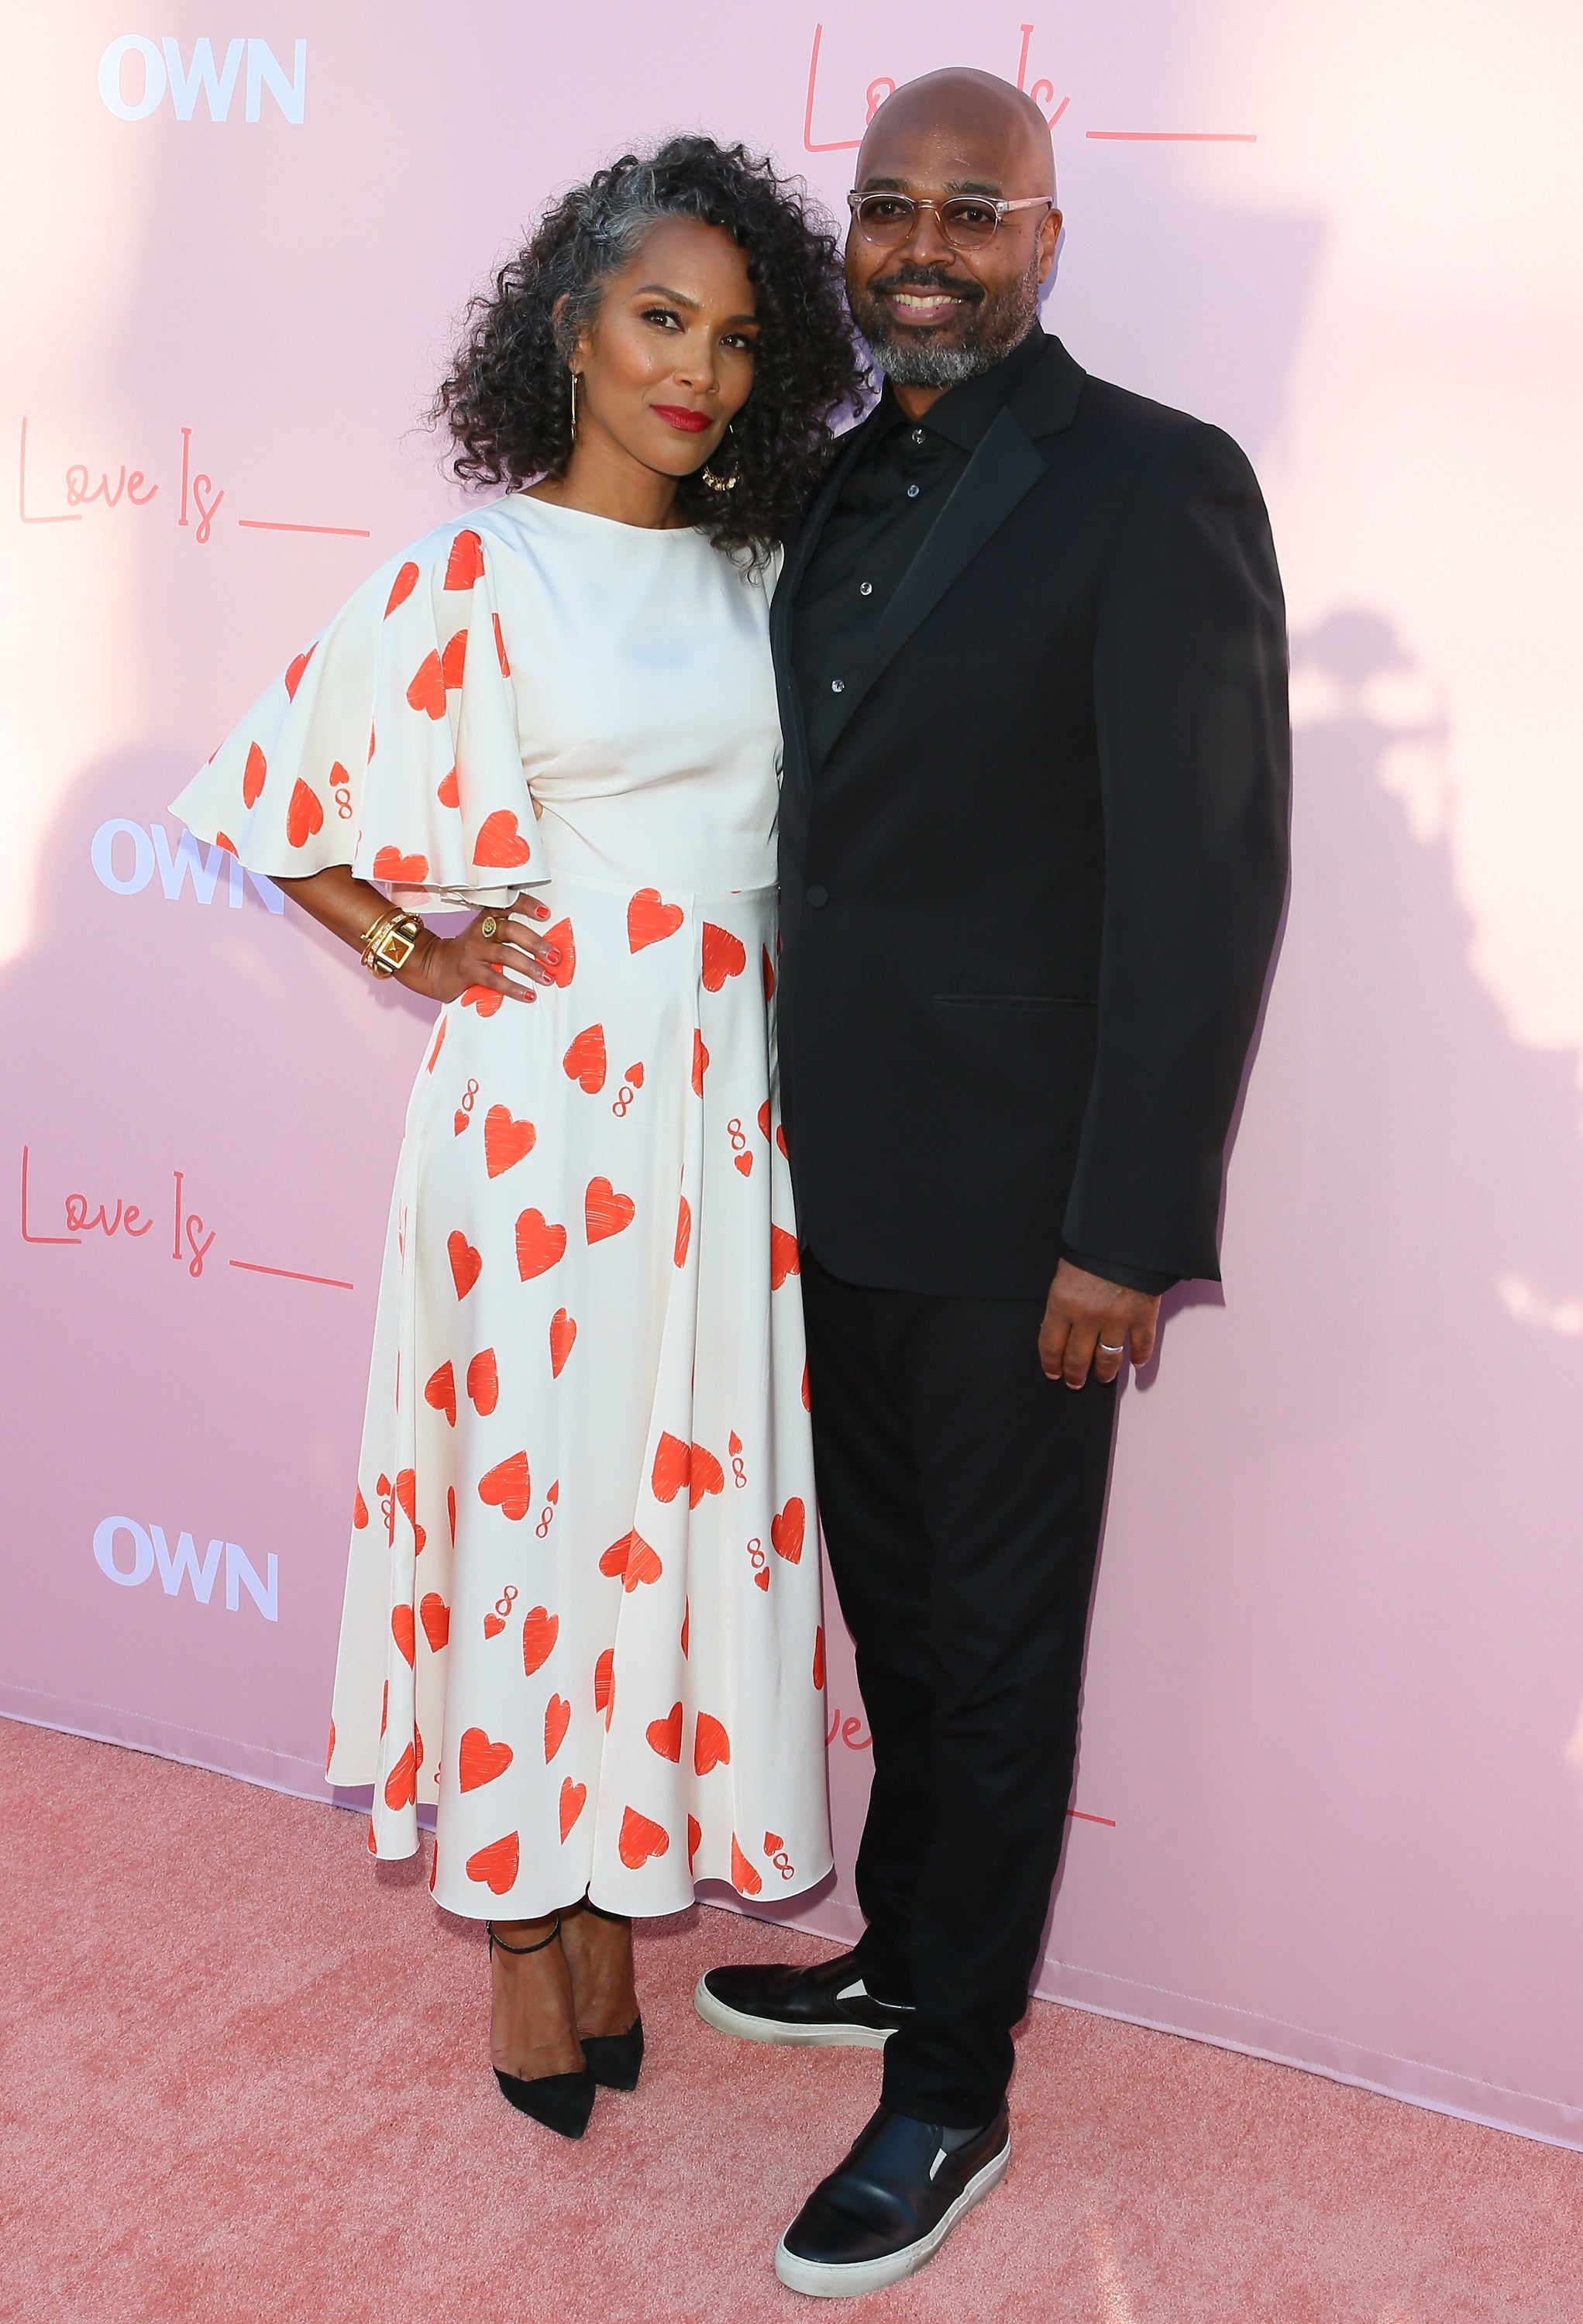 Celebs Come Out To Support Black Love And OWN's New Drama 'Love Is'
